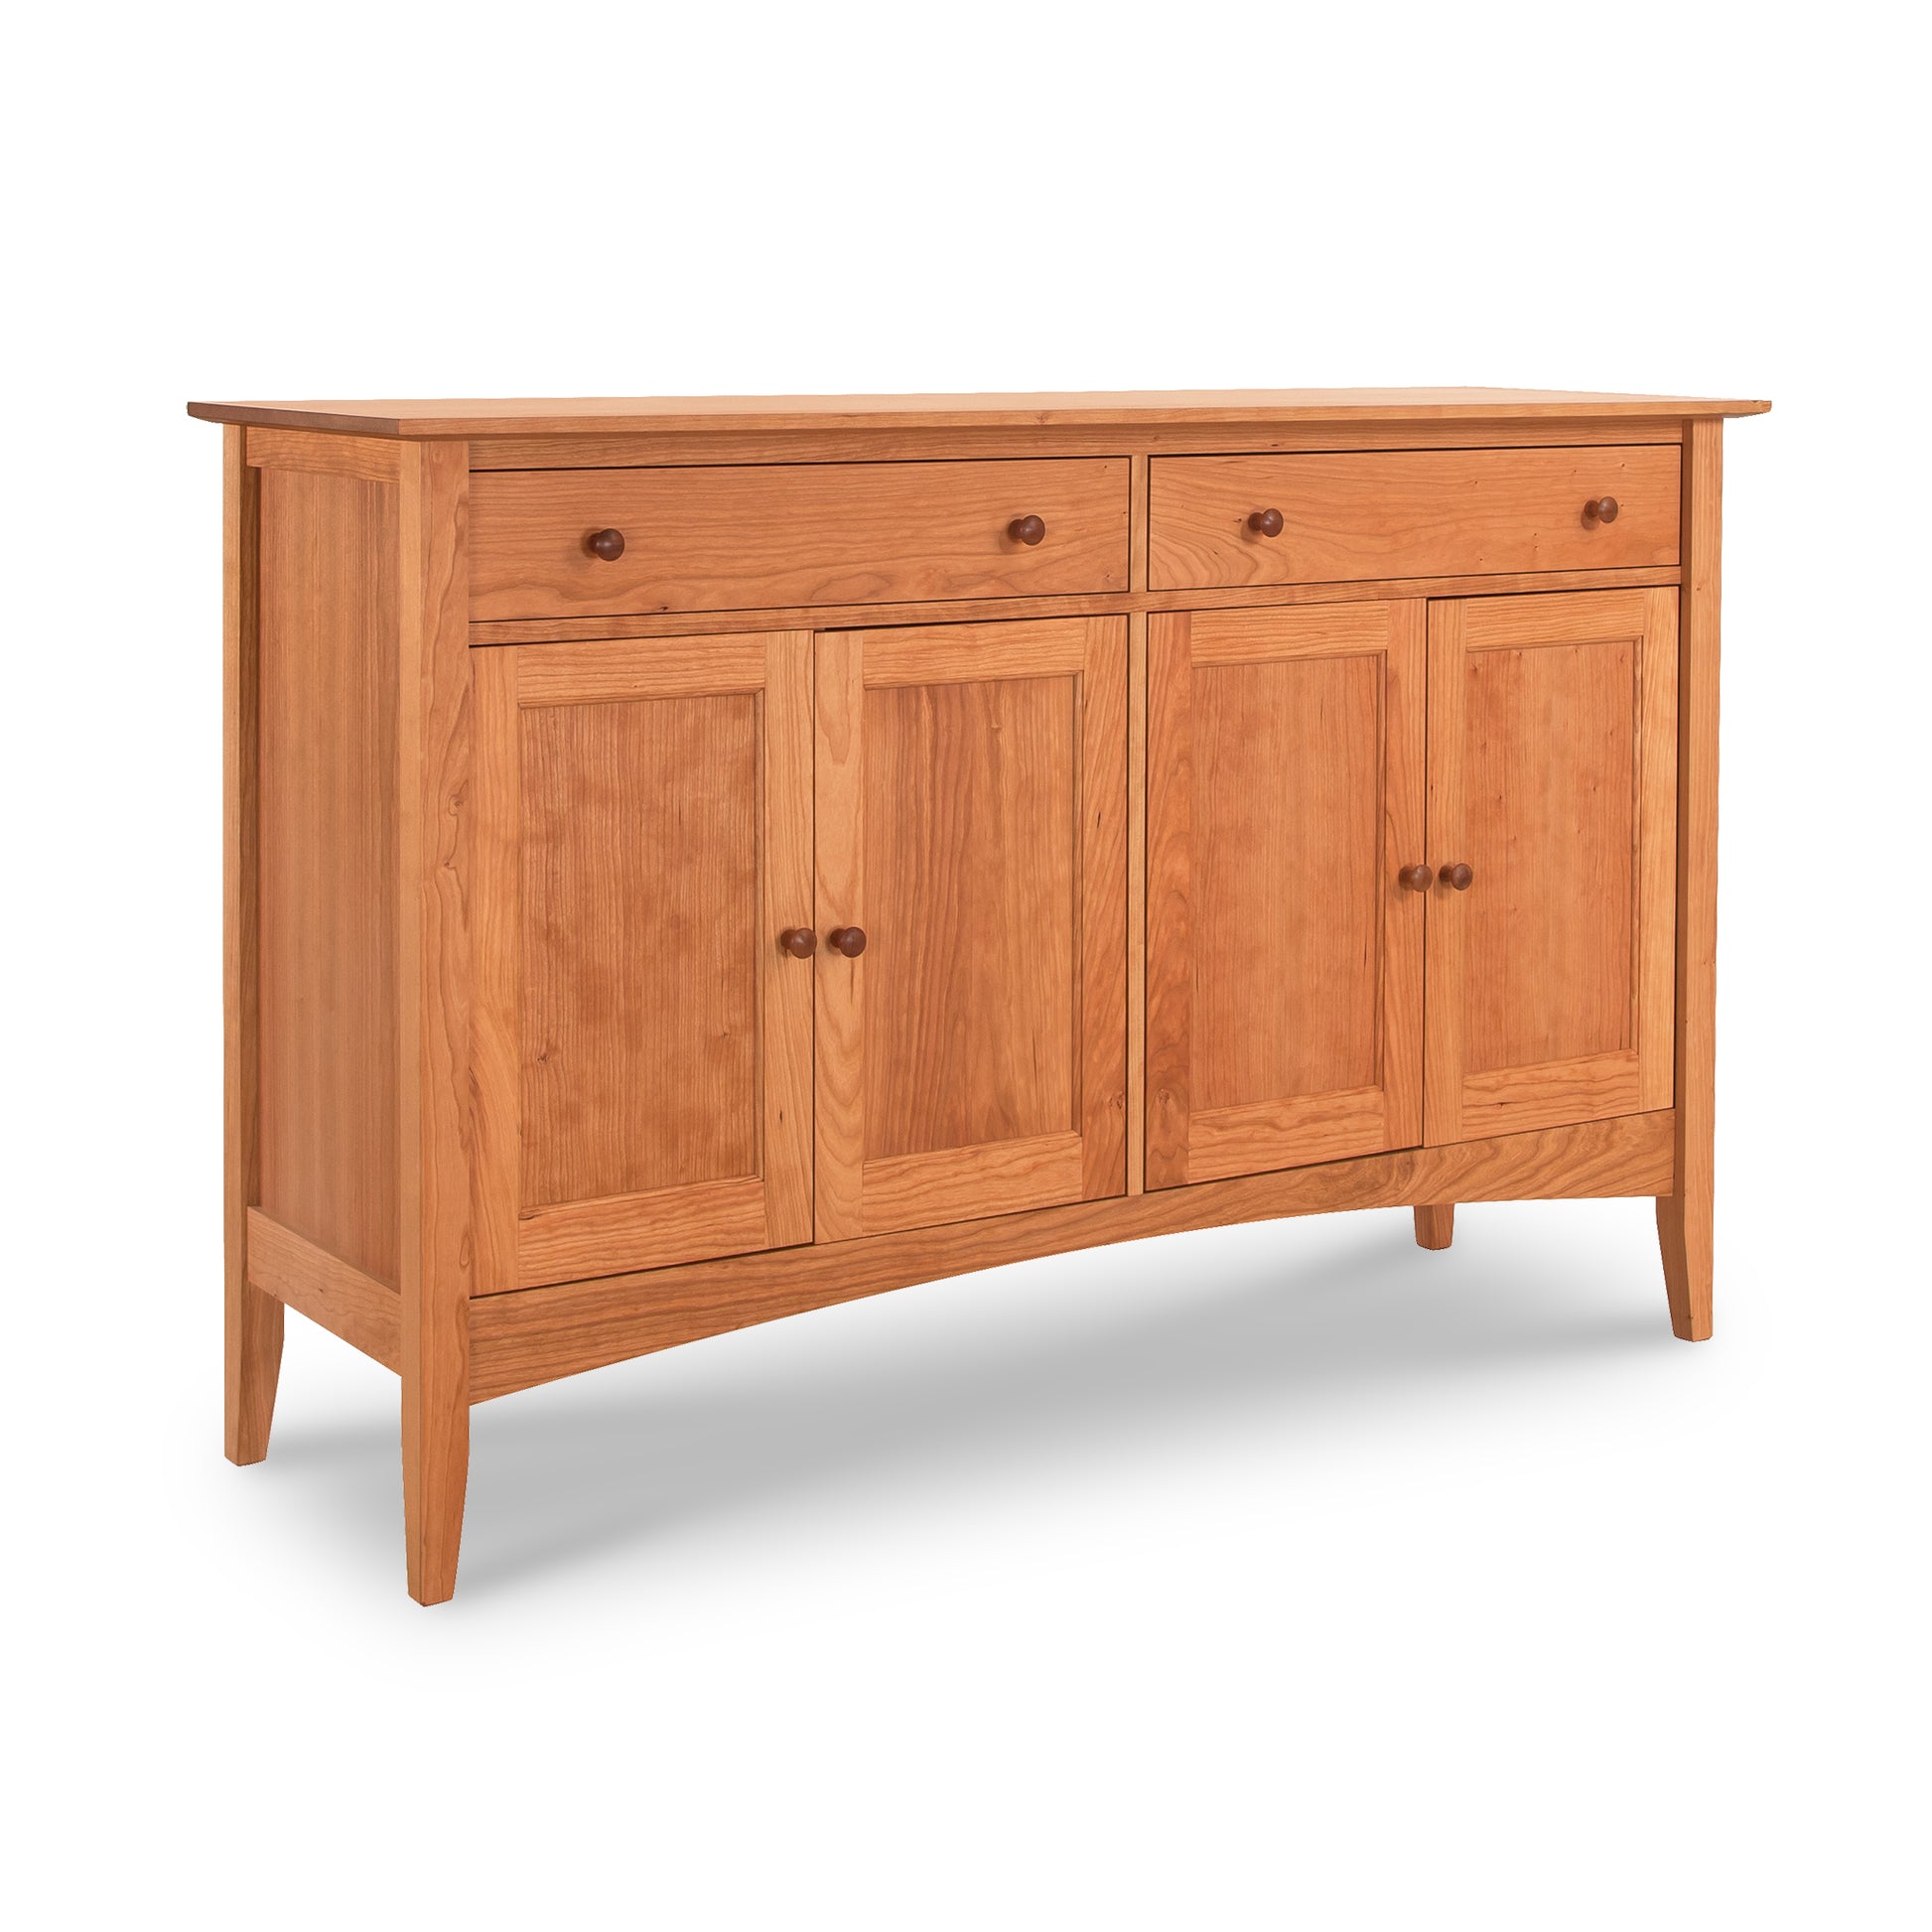 A large Maple Corner Woodworks American Shaker sideboard with two drawers and three cabinet doors, featuring solid hardwood construction and set against a white background.